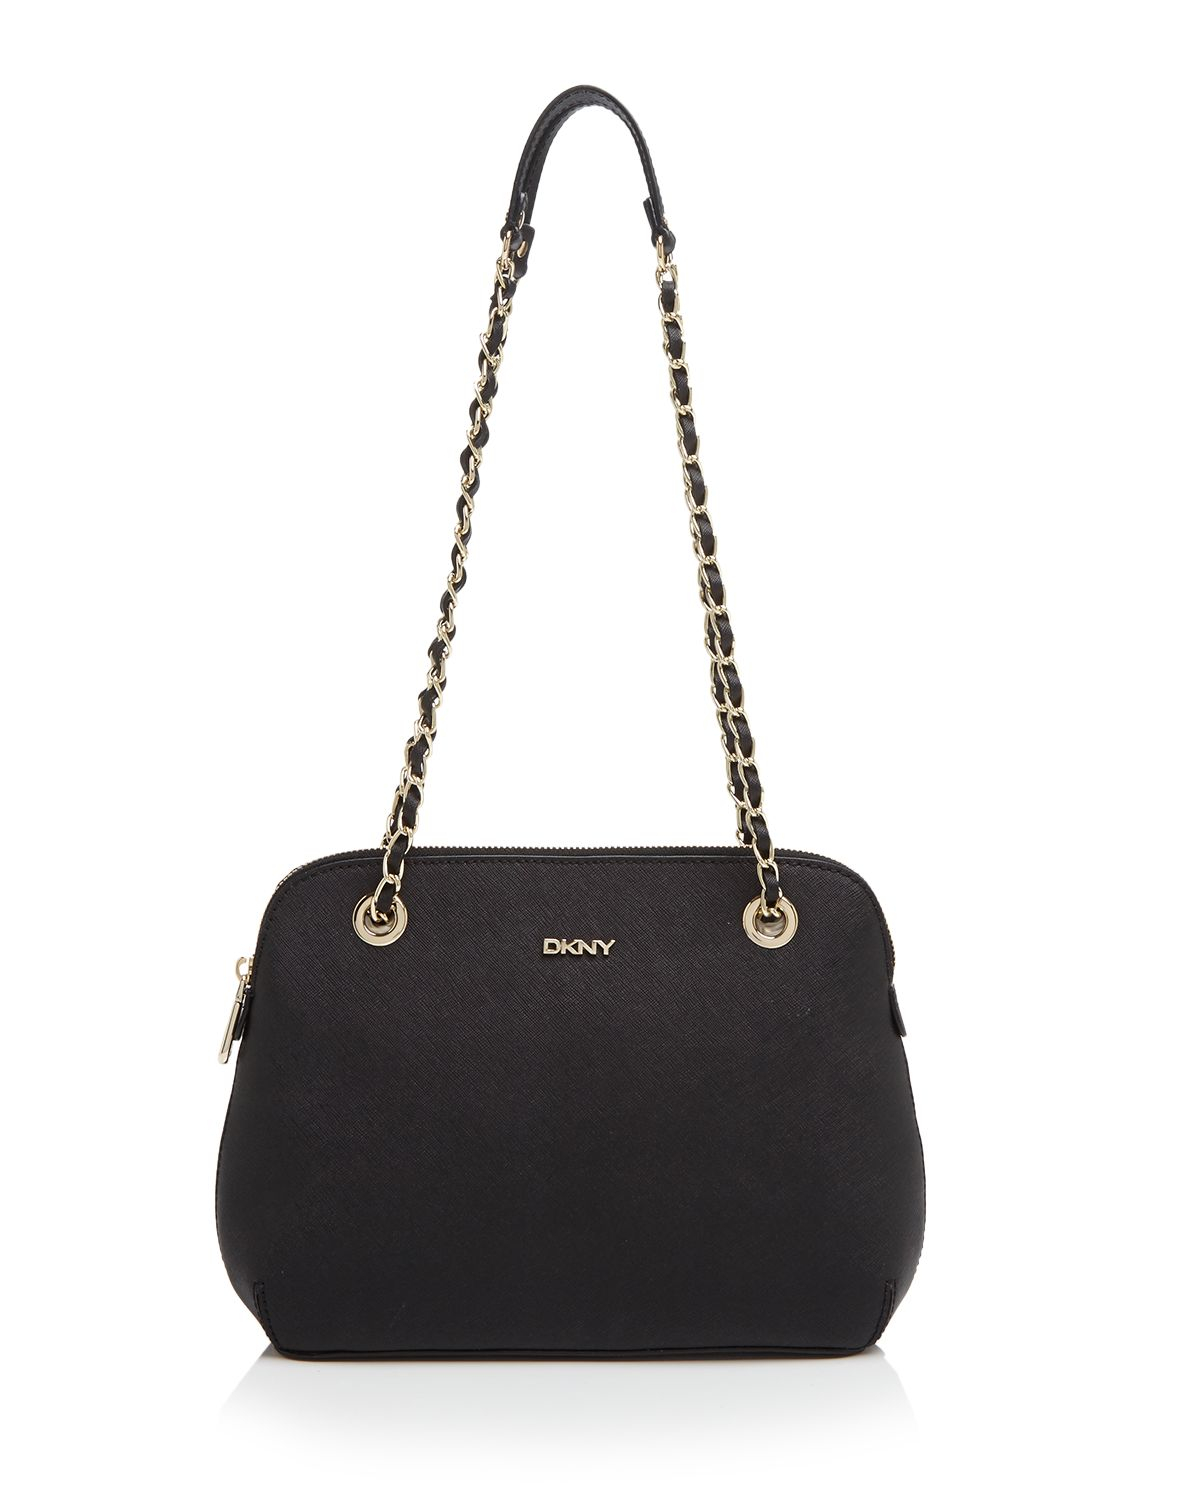 DKNY Shoulder Bag - Round Saffiano Chain Handle in Black - Lyst